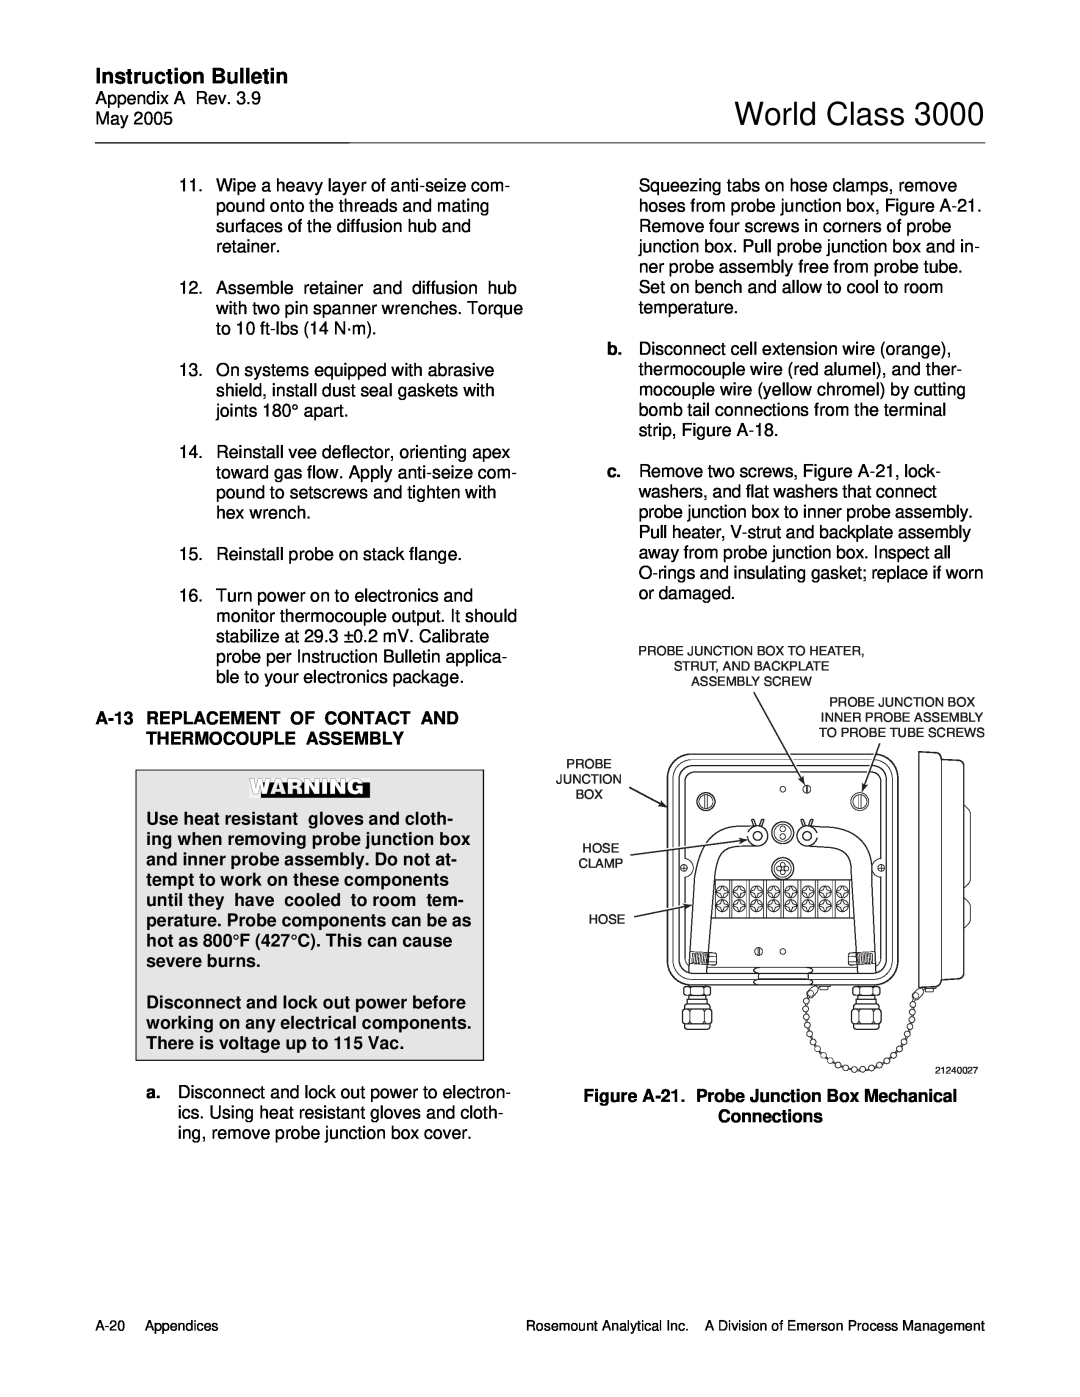 Emerson 3000 World Class, Instruction Bulletin, A-13REPLACEMENT OF CONTACT AND, Thermocouple Assembly, Connections 